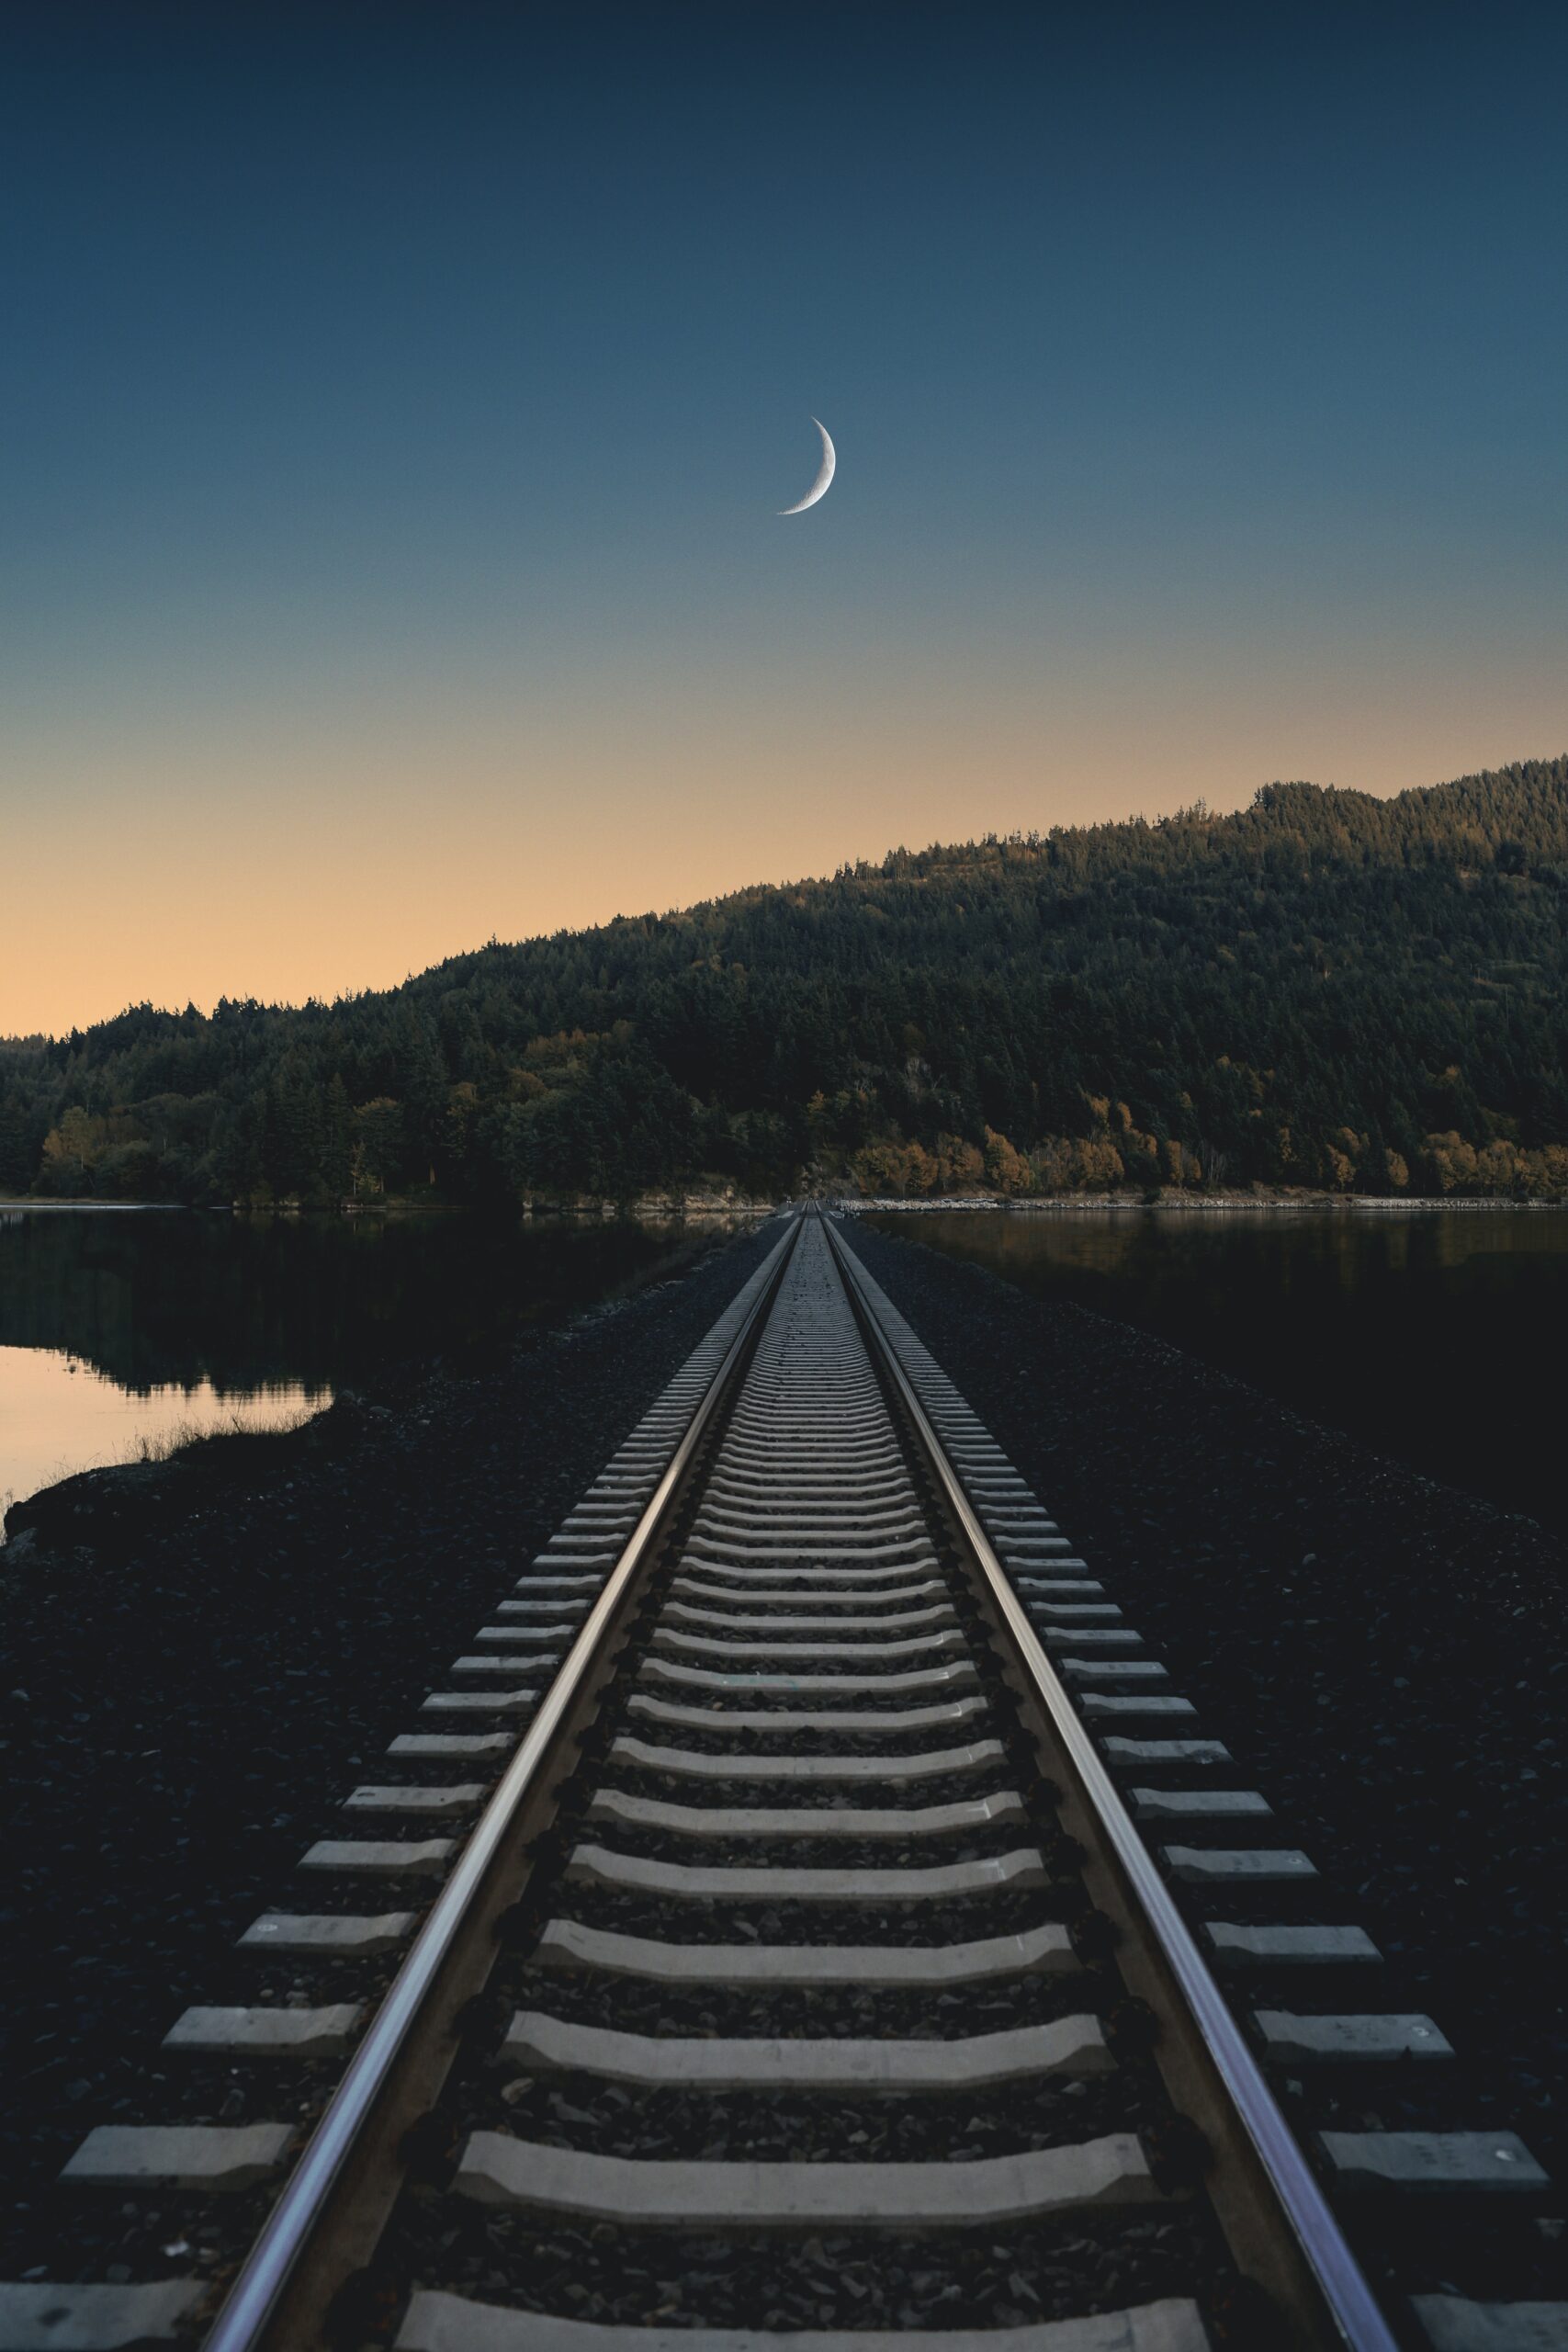 view of the moon from railroad tracks in the Chuckanut neighborhood